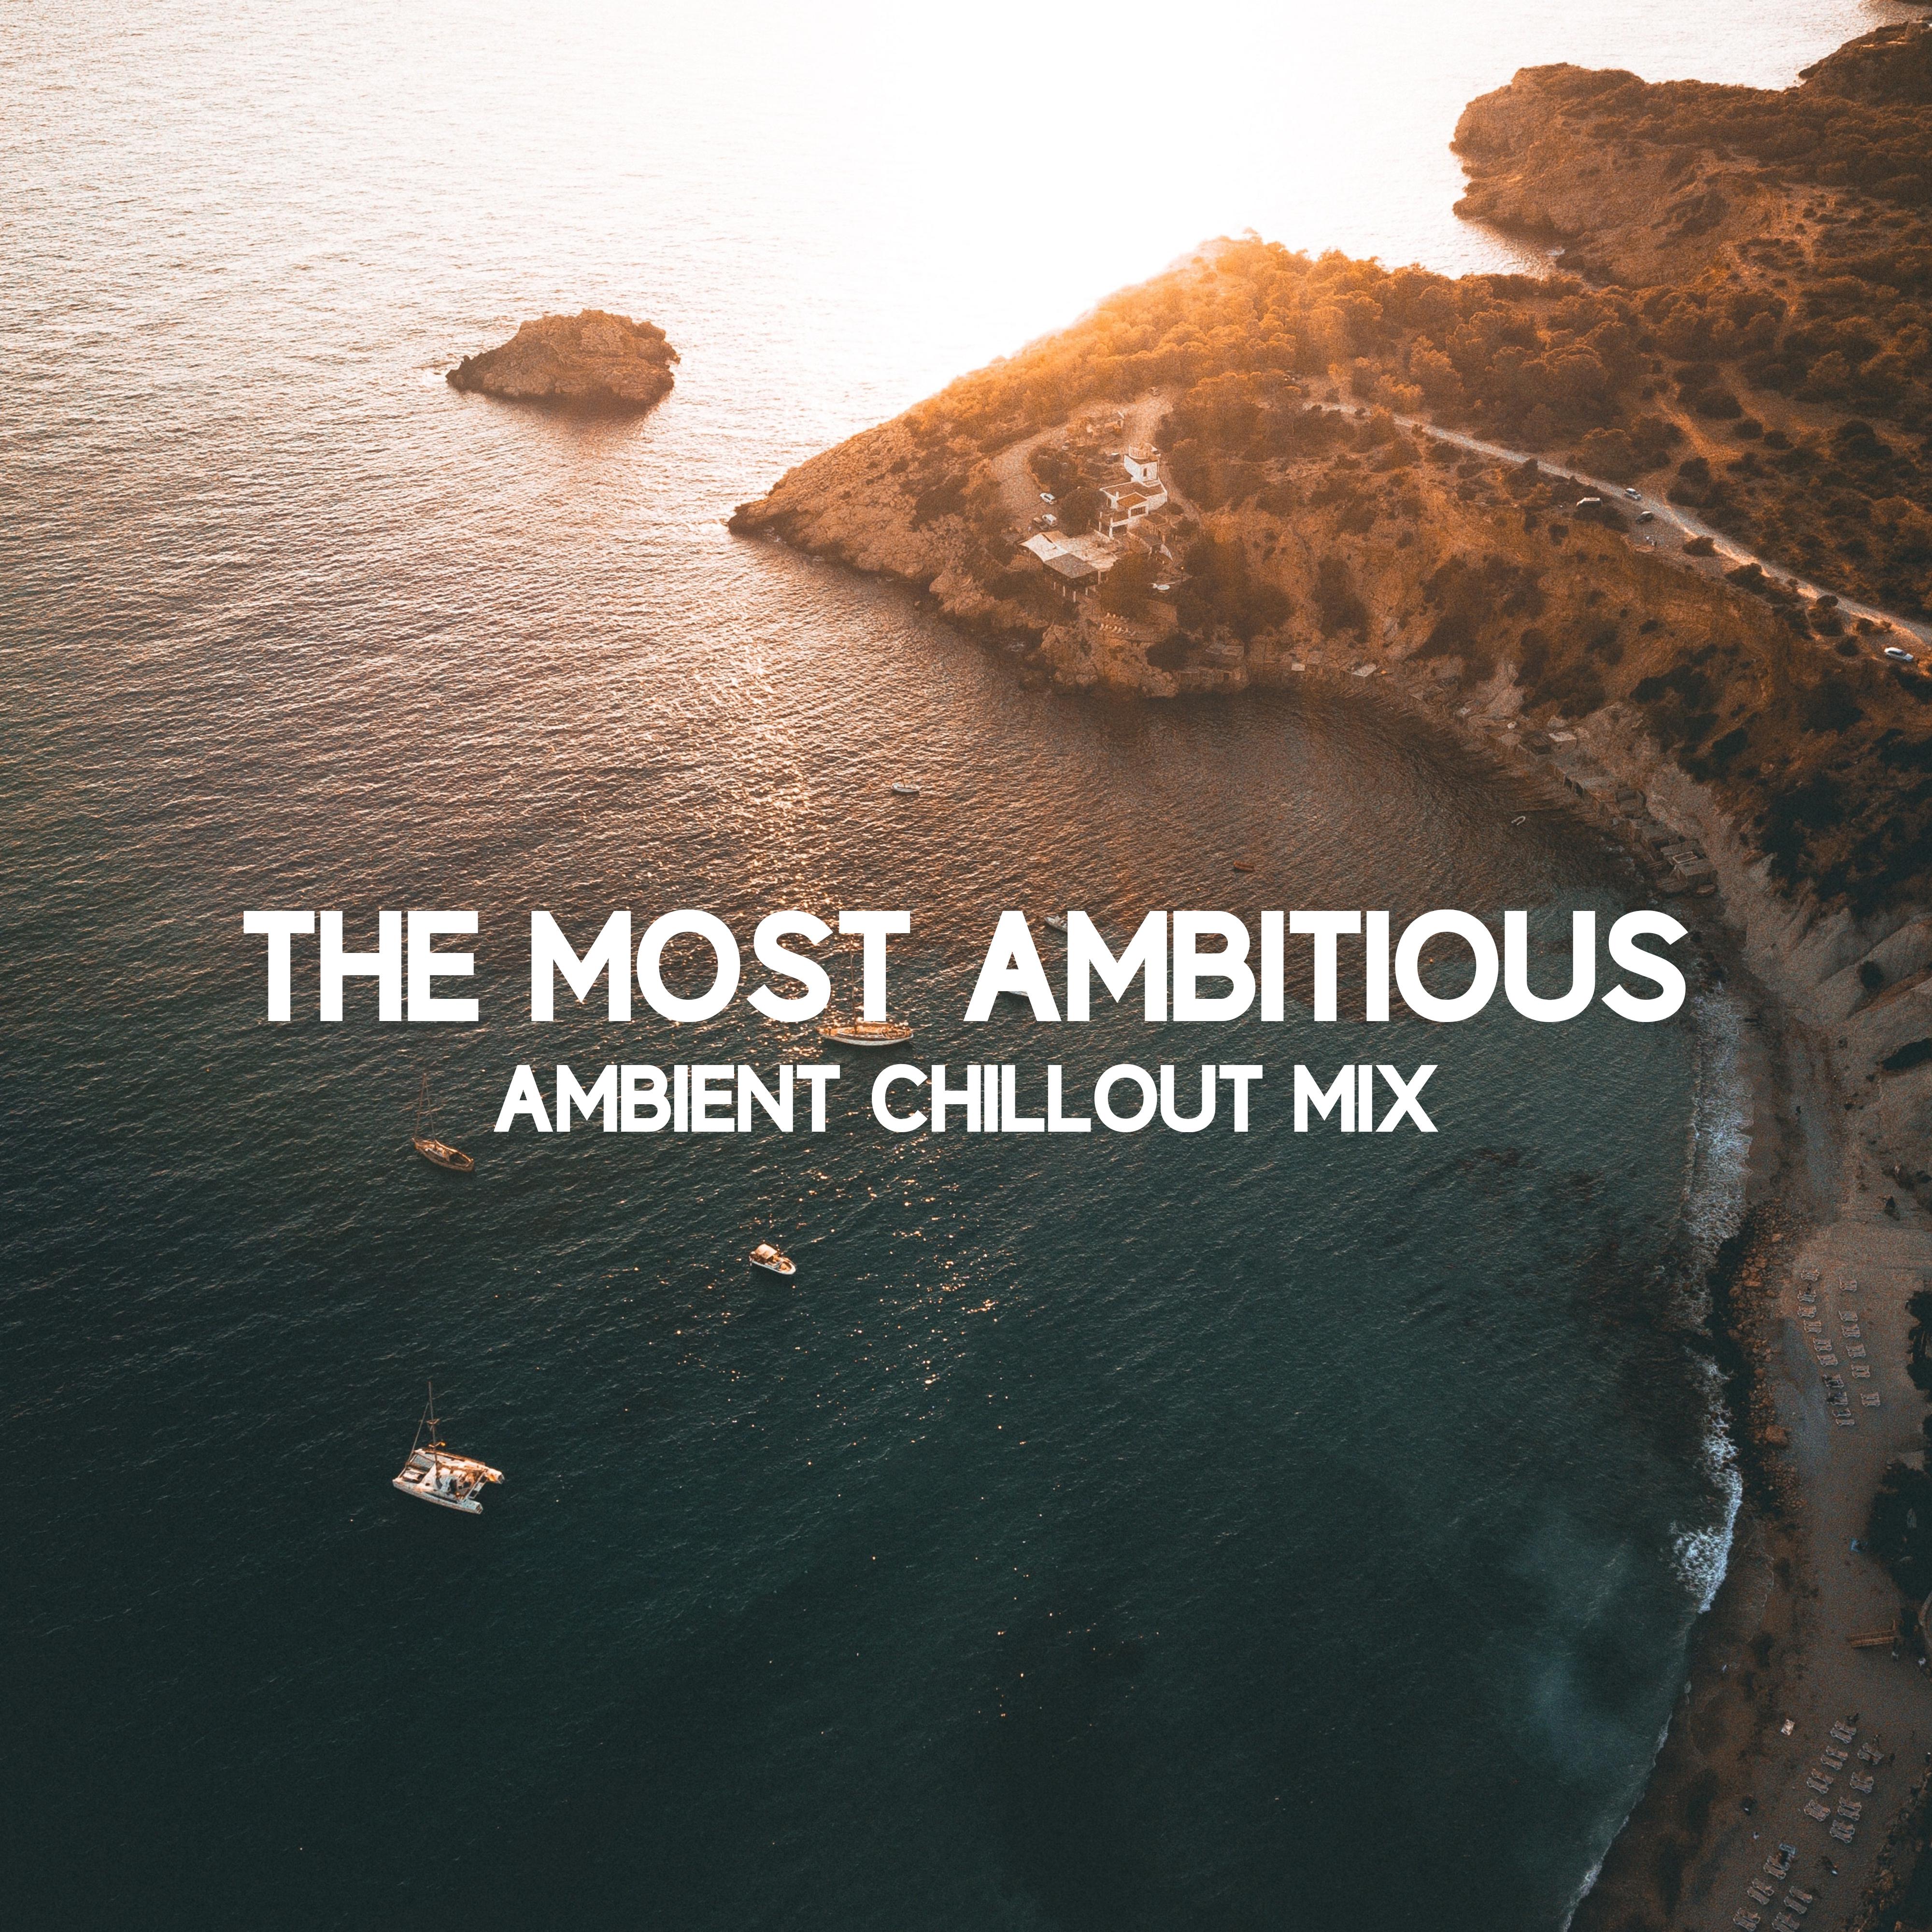 The Most Ambitious Ambient Chillout Mix: 2019 Chill Out Sensual Melodies Compilation, Music for Relax & Rest